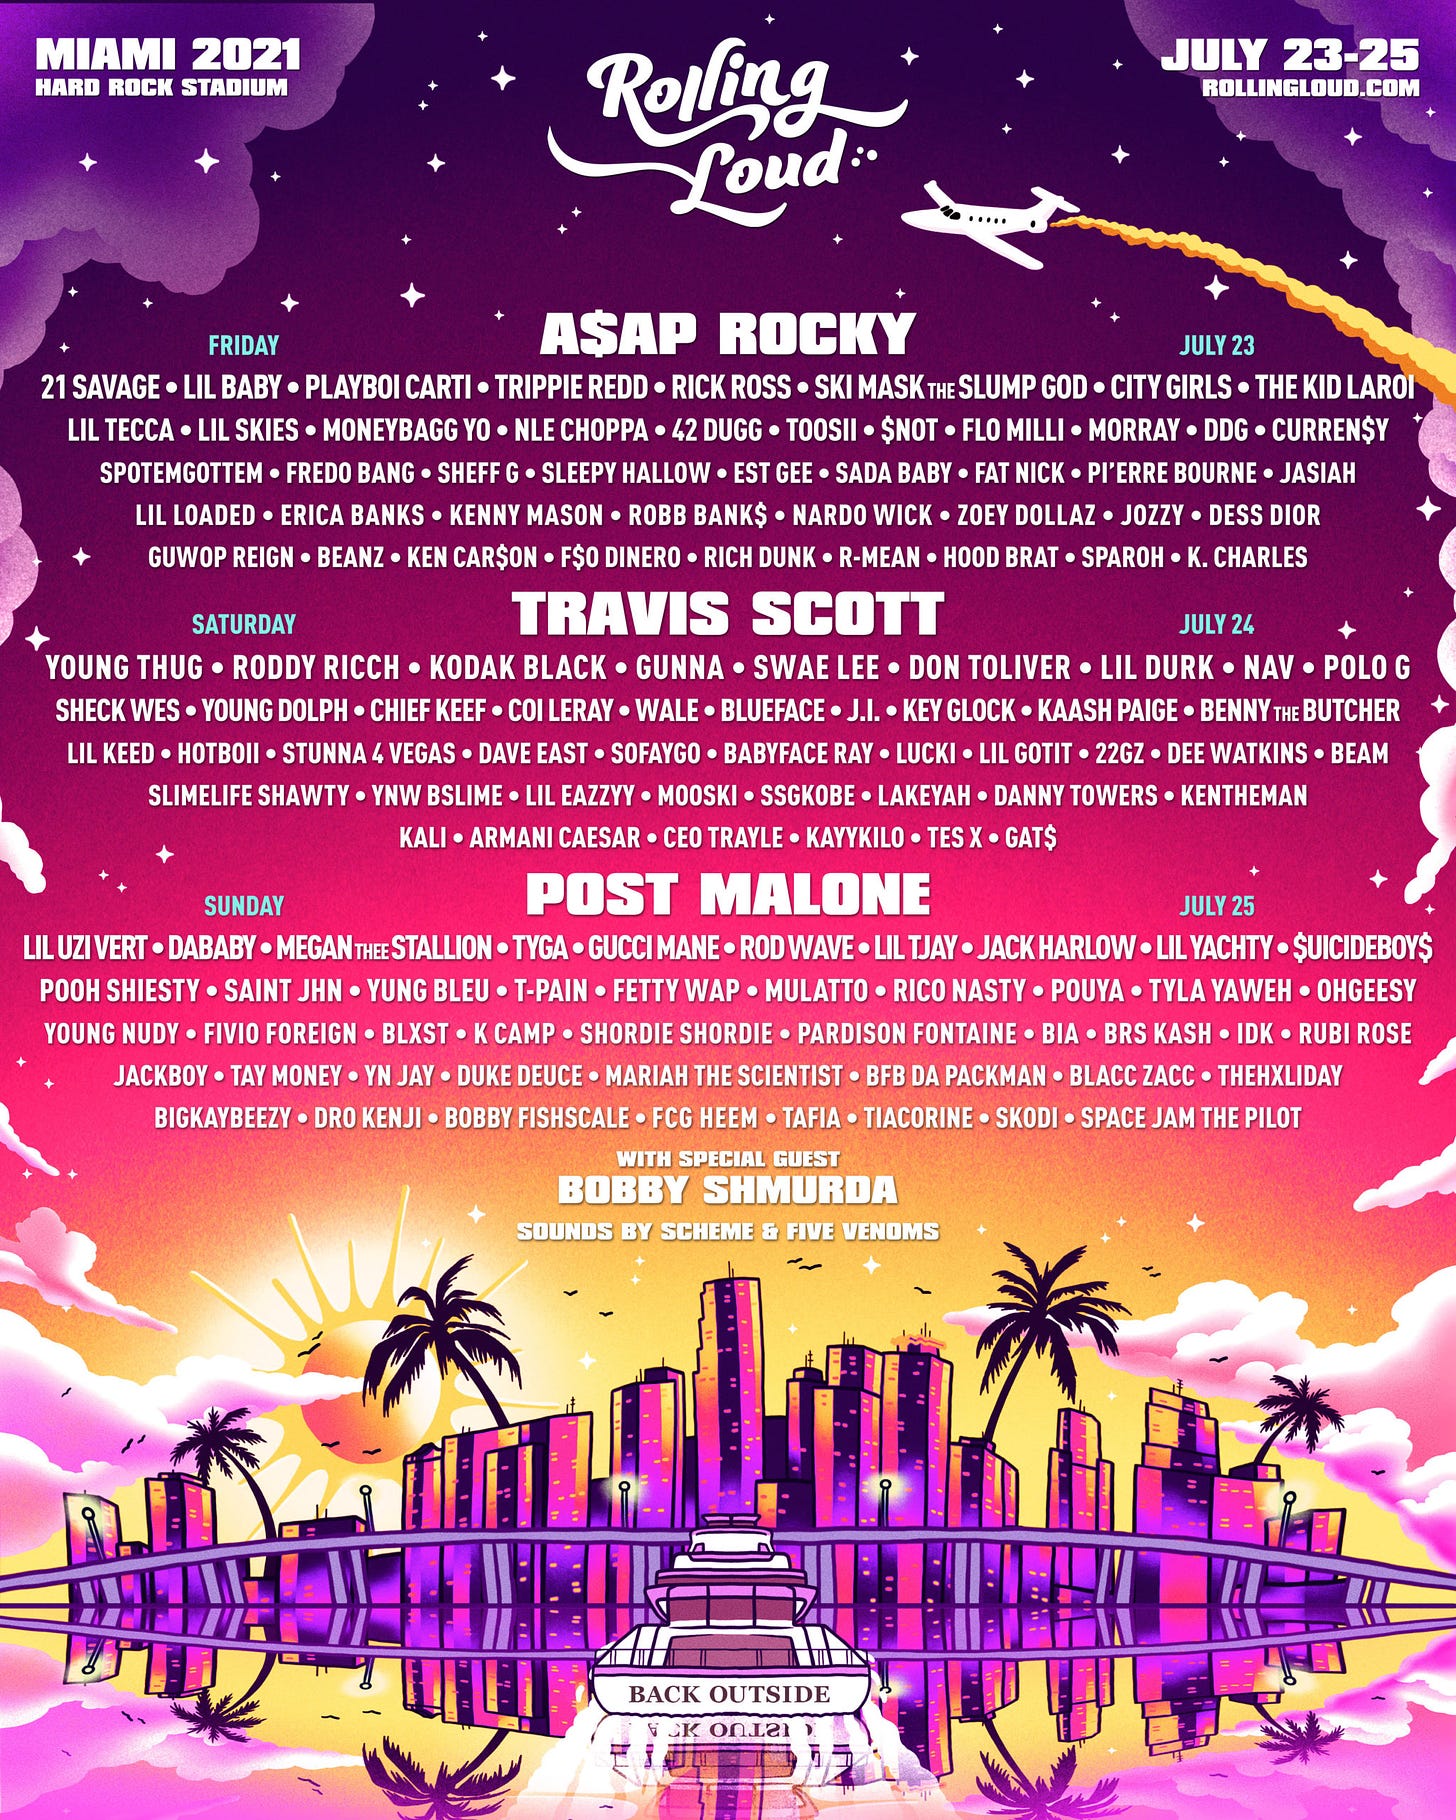 Lineup Alert ☀️ Rolling Loud Miami 2021: A$AP Rocky, Travis Scott, Post  Malone + Megan Thee Stallion, Young Thug, and more | RESPECT.